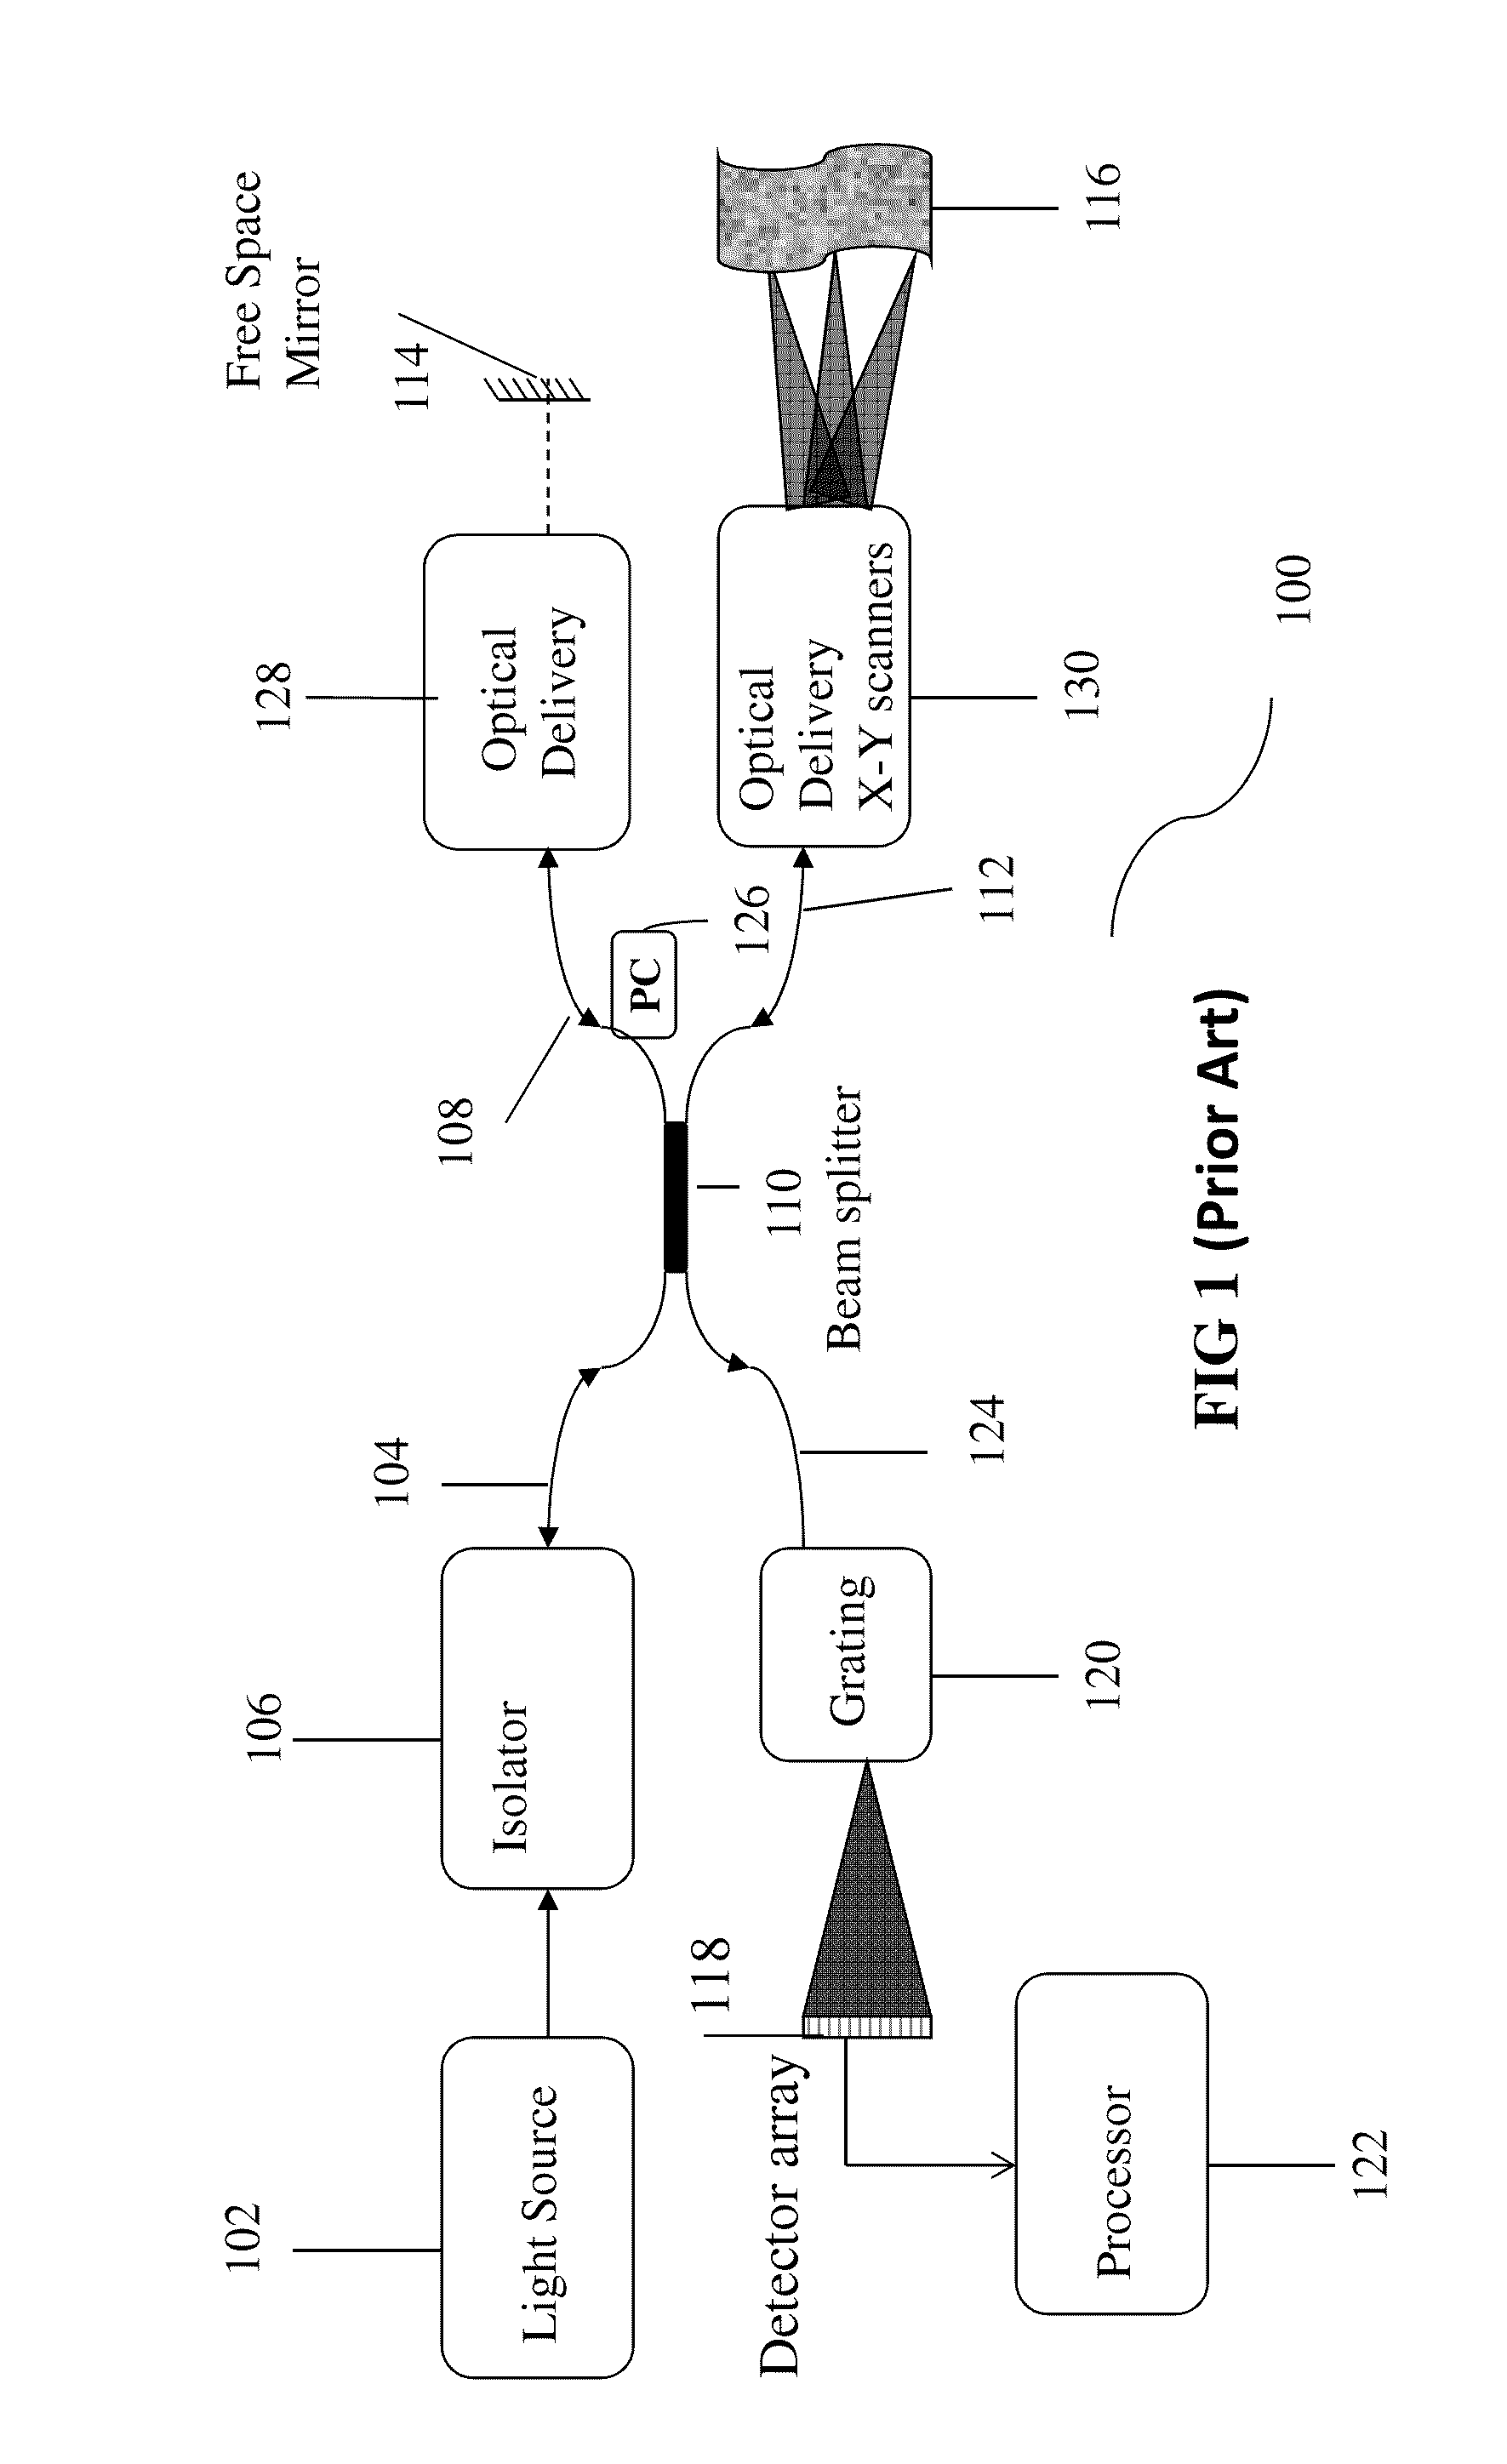 Method and System for Compact Optical Coherence Tomography